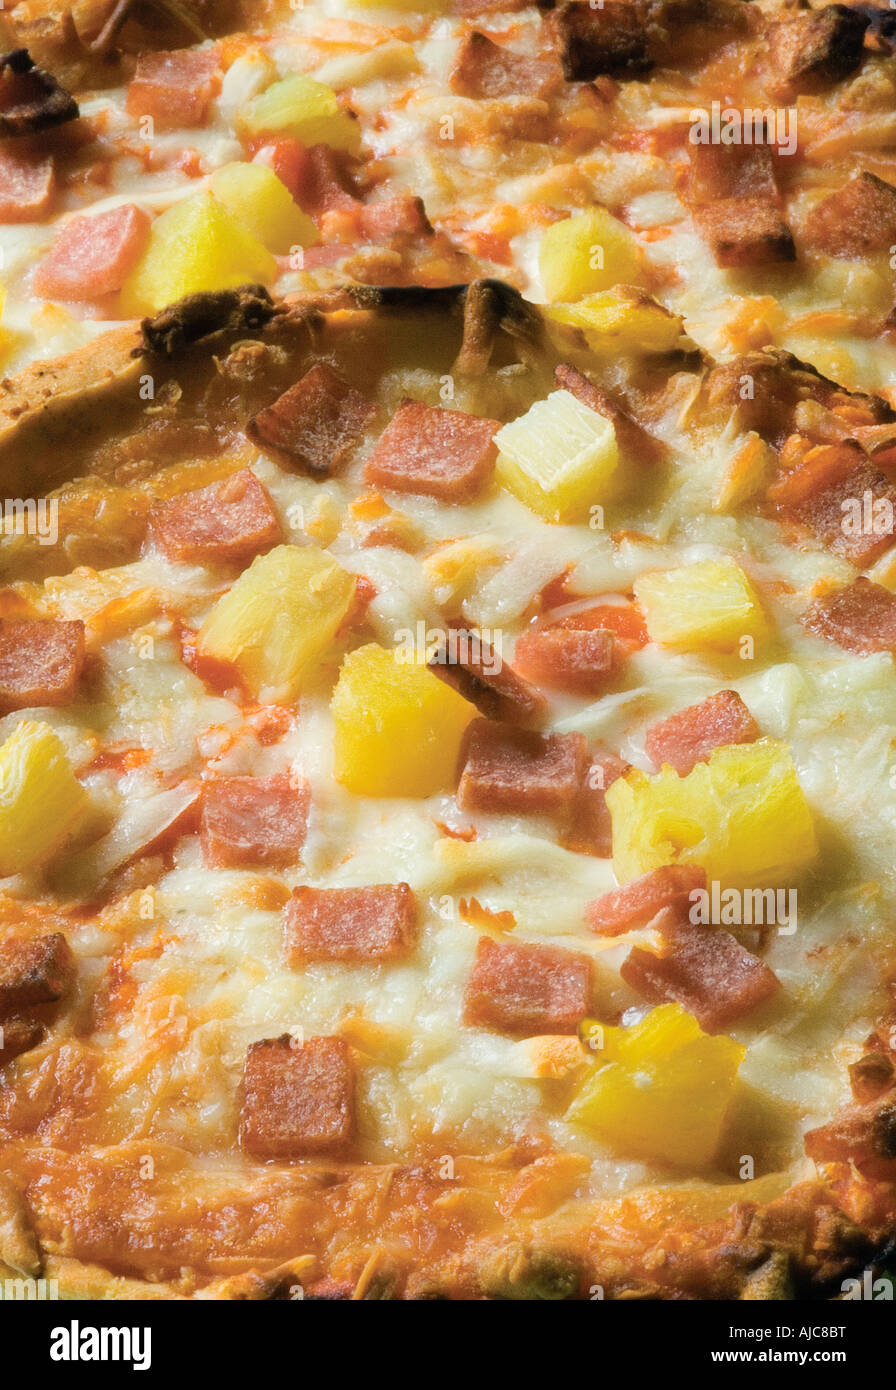 pizzas with cheese and pineapple cooked unitl golden brown often ordered from a take away or Italian restaurant Stock Photo